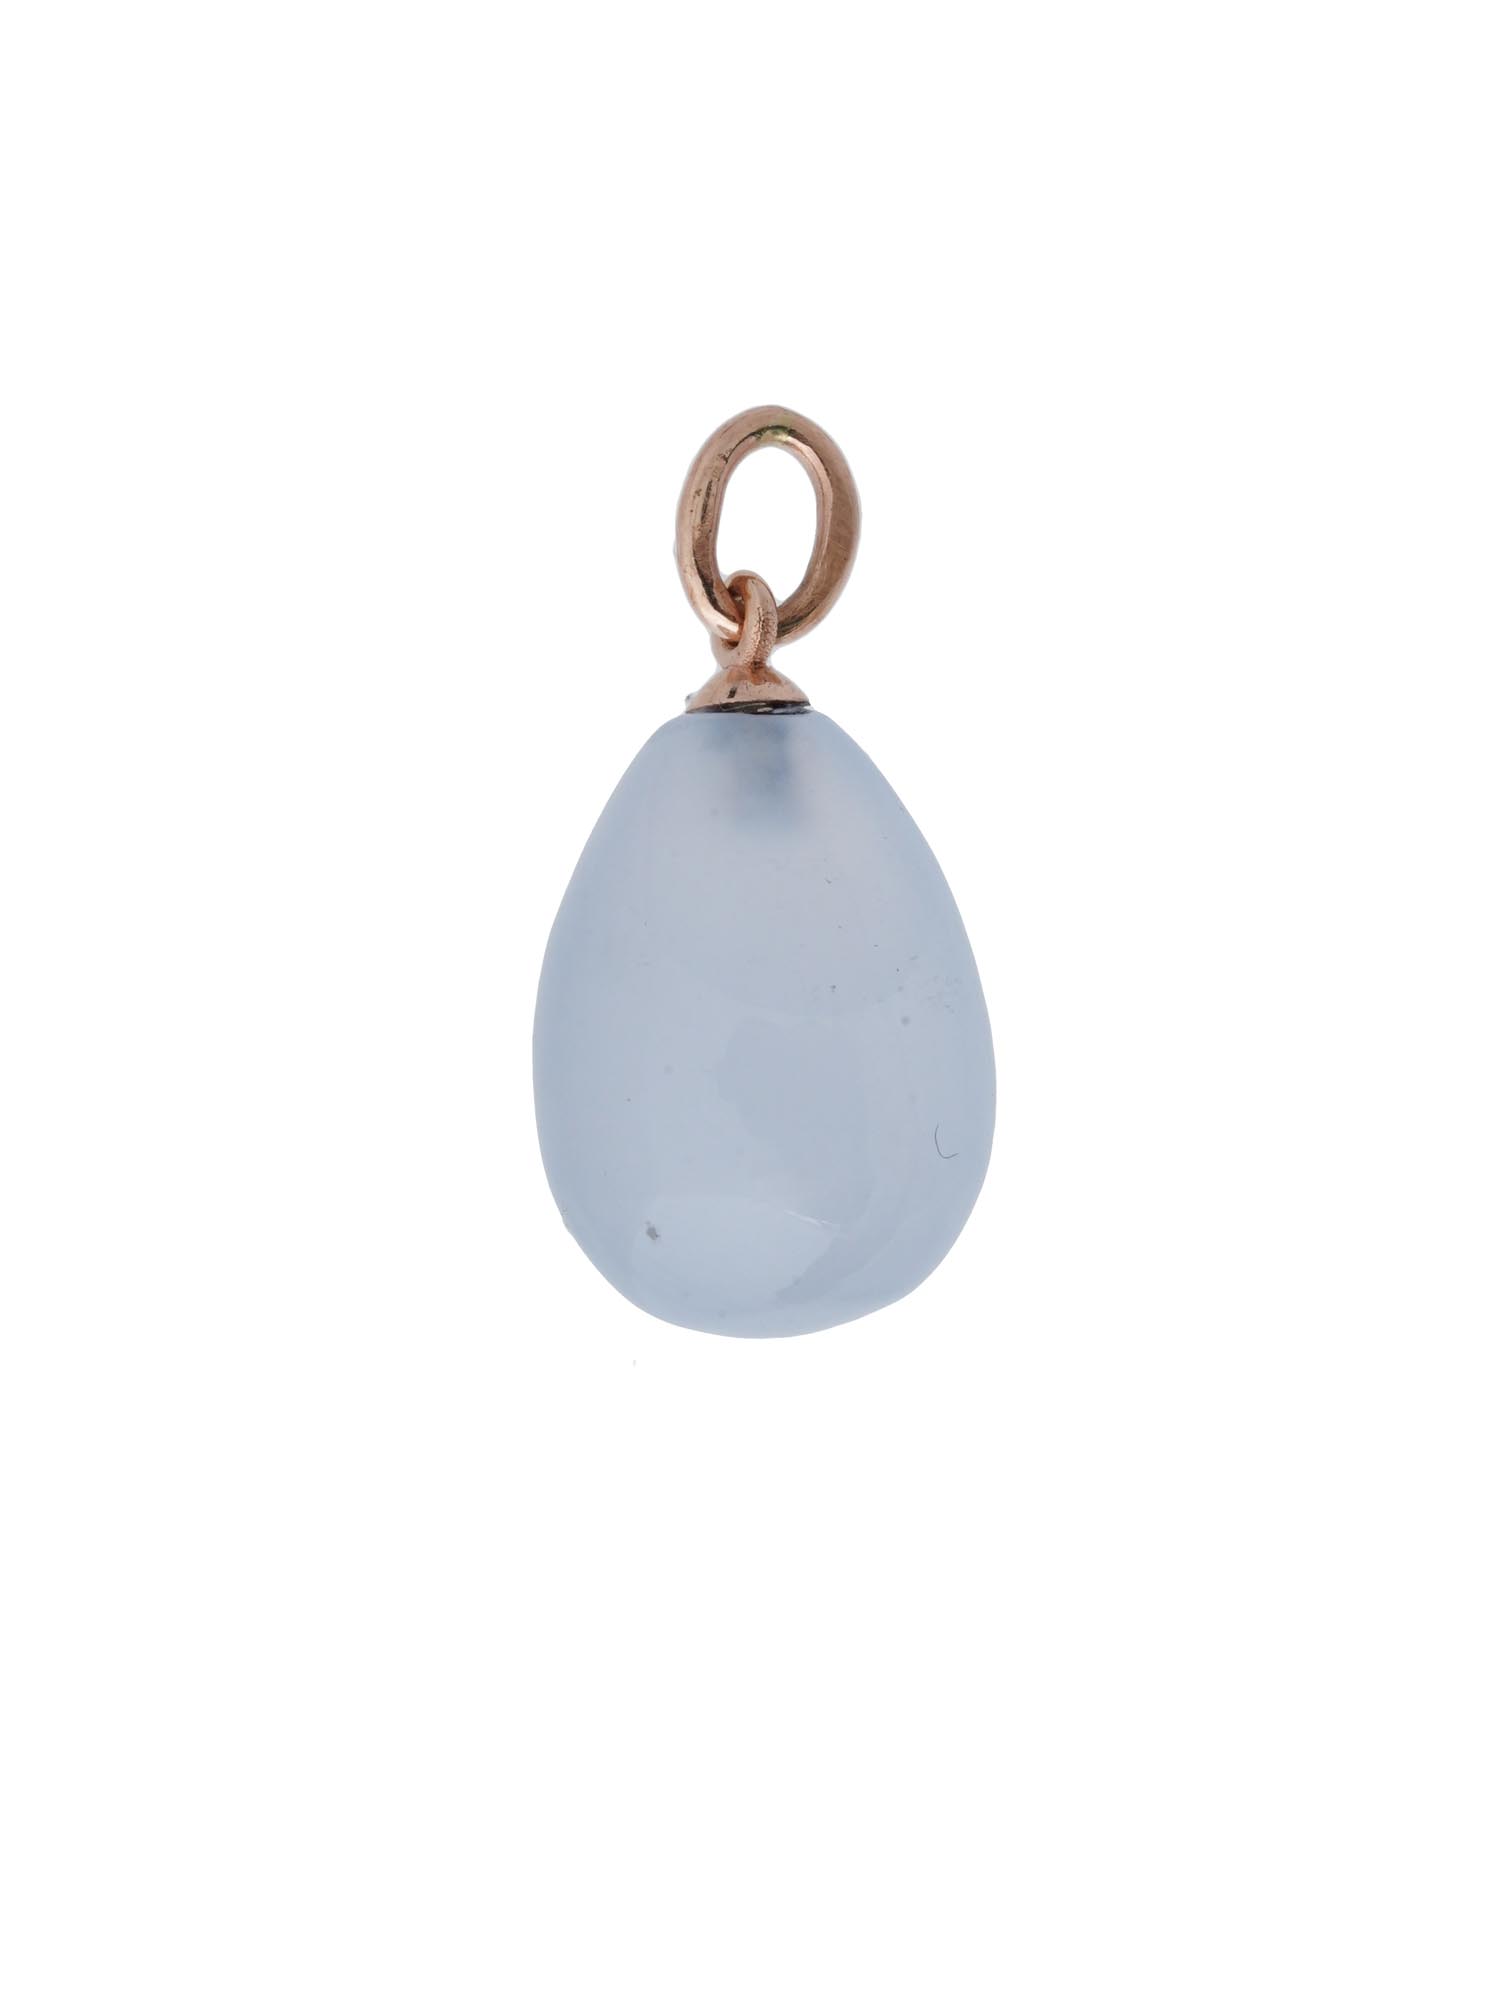 RUSSIAN 14K GOLD AND BLUE CHALCEDONY EGG PENDANT PIC-0